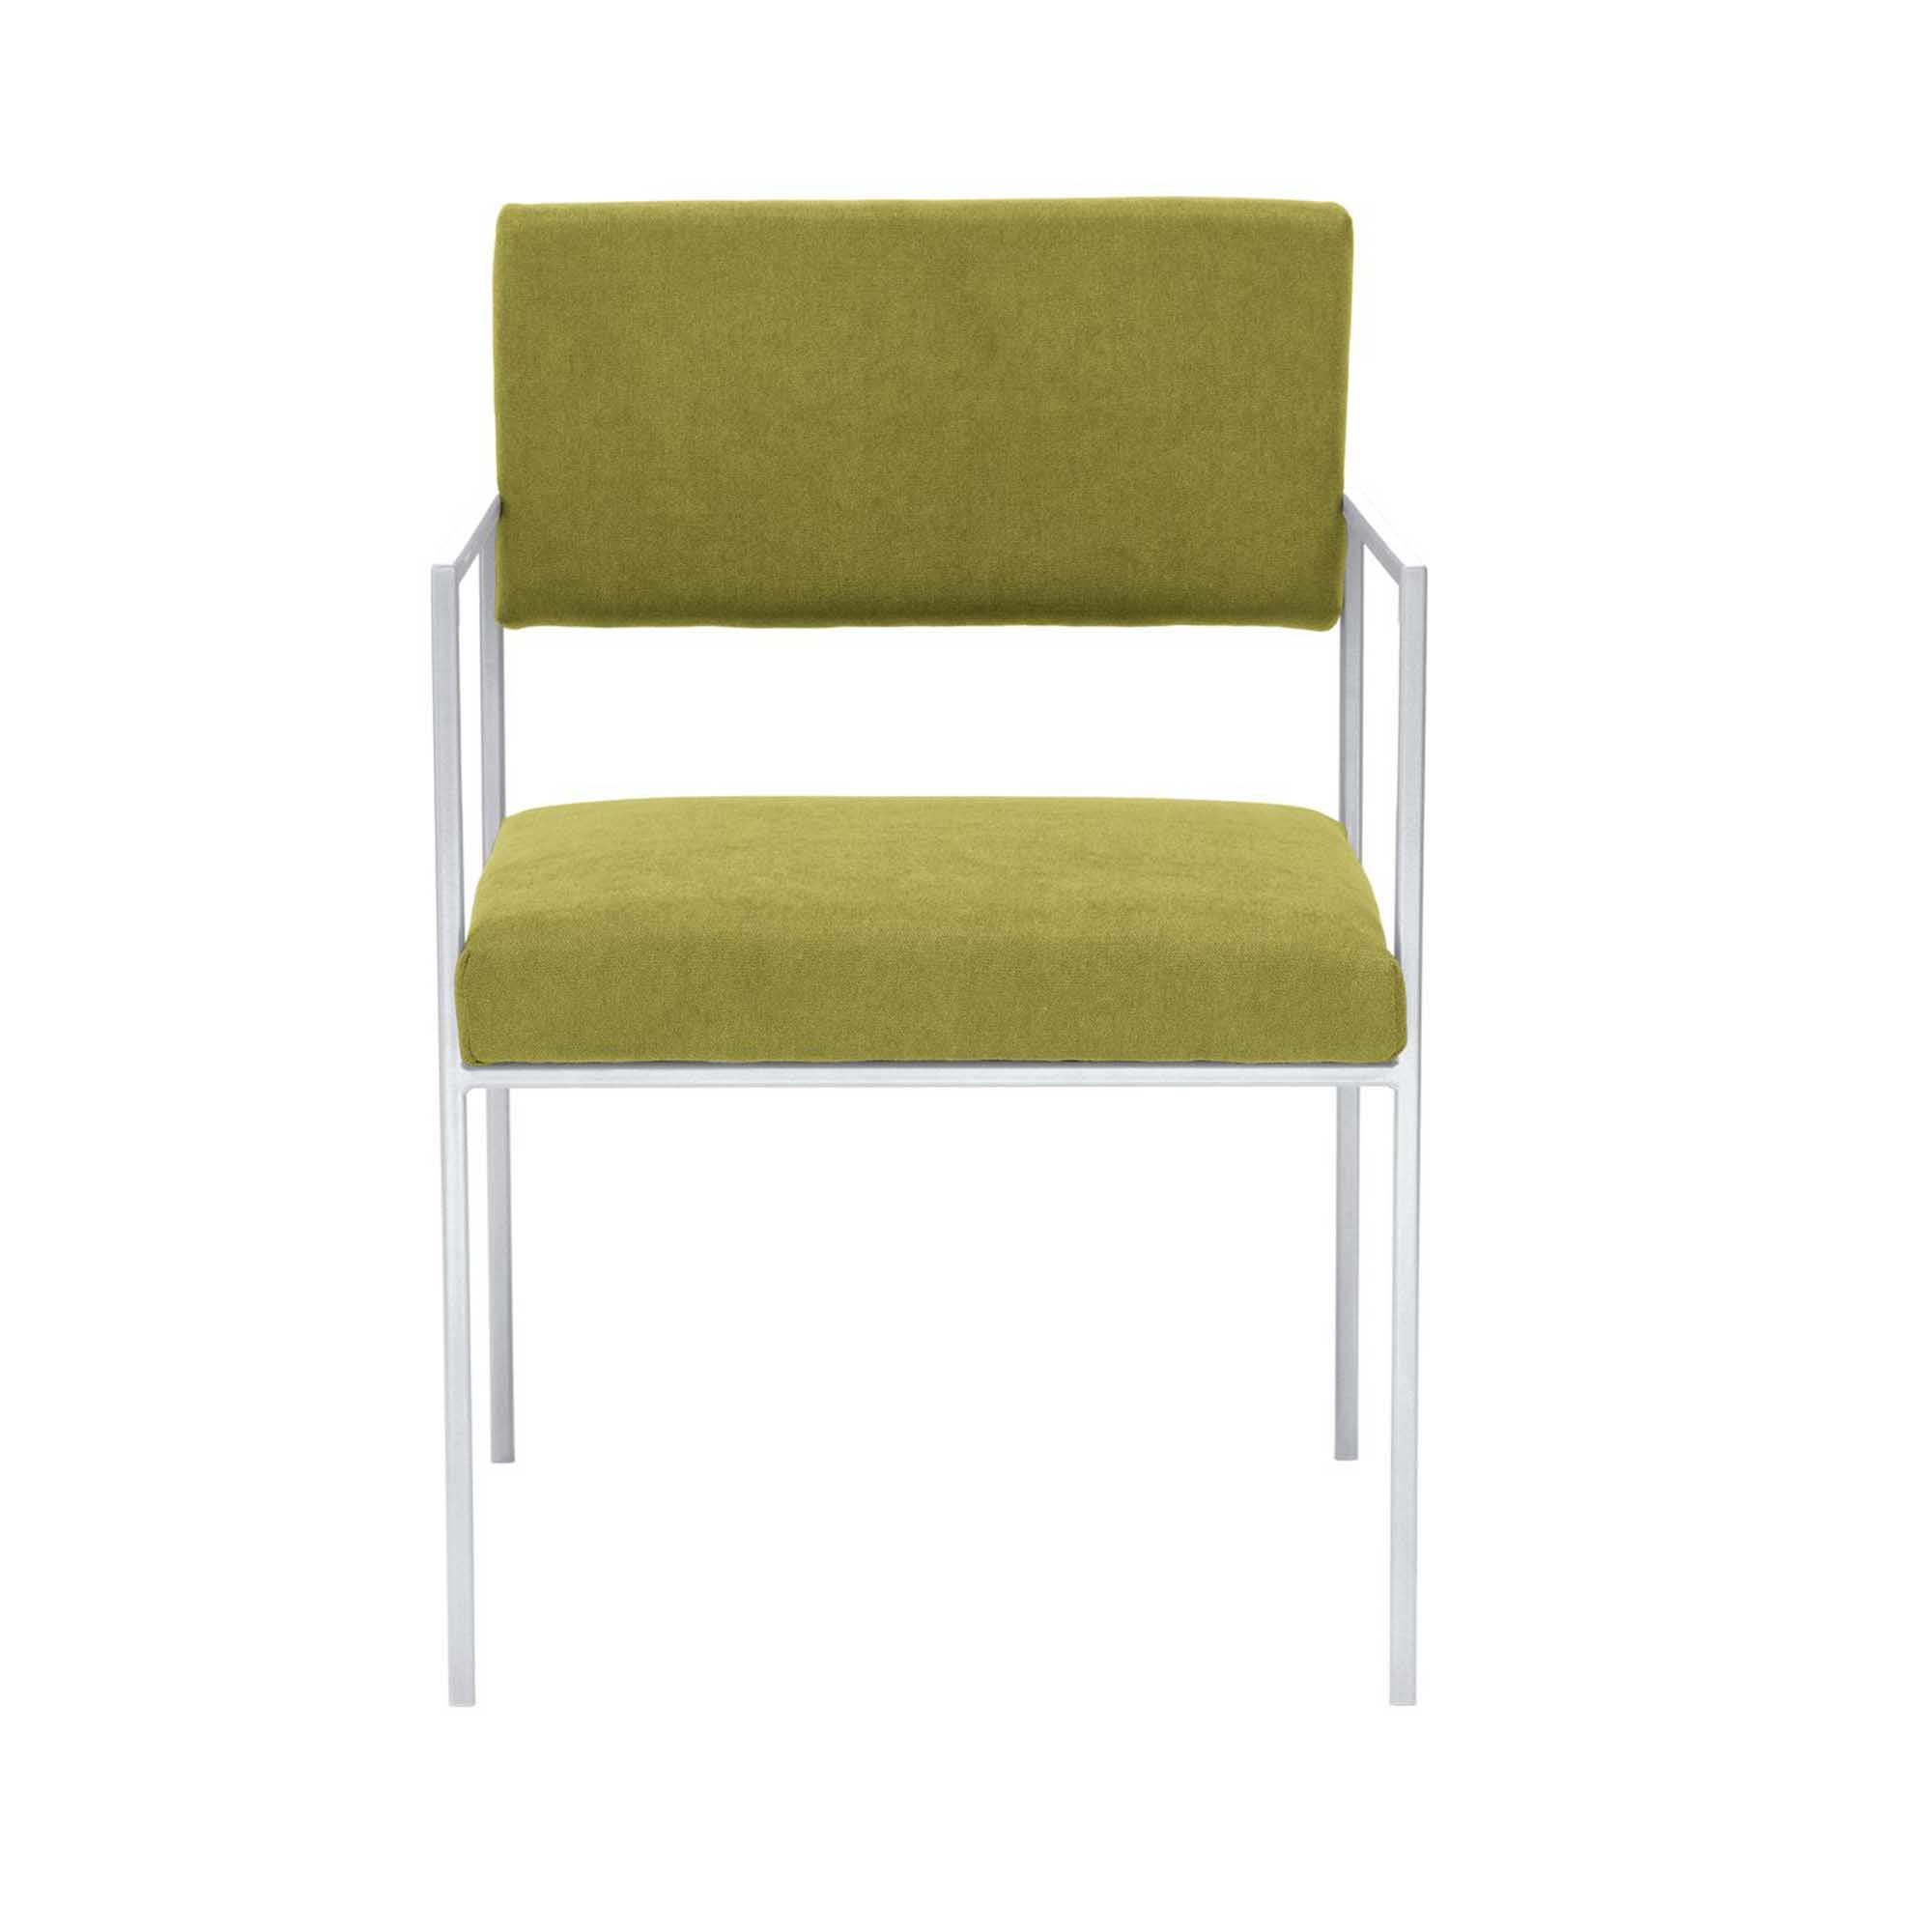 CUBE Armchair, Powder-Coated Steel Frame green fabric, white frame, front view